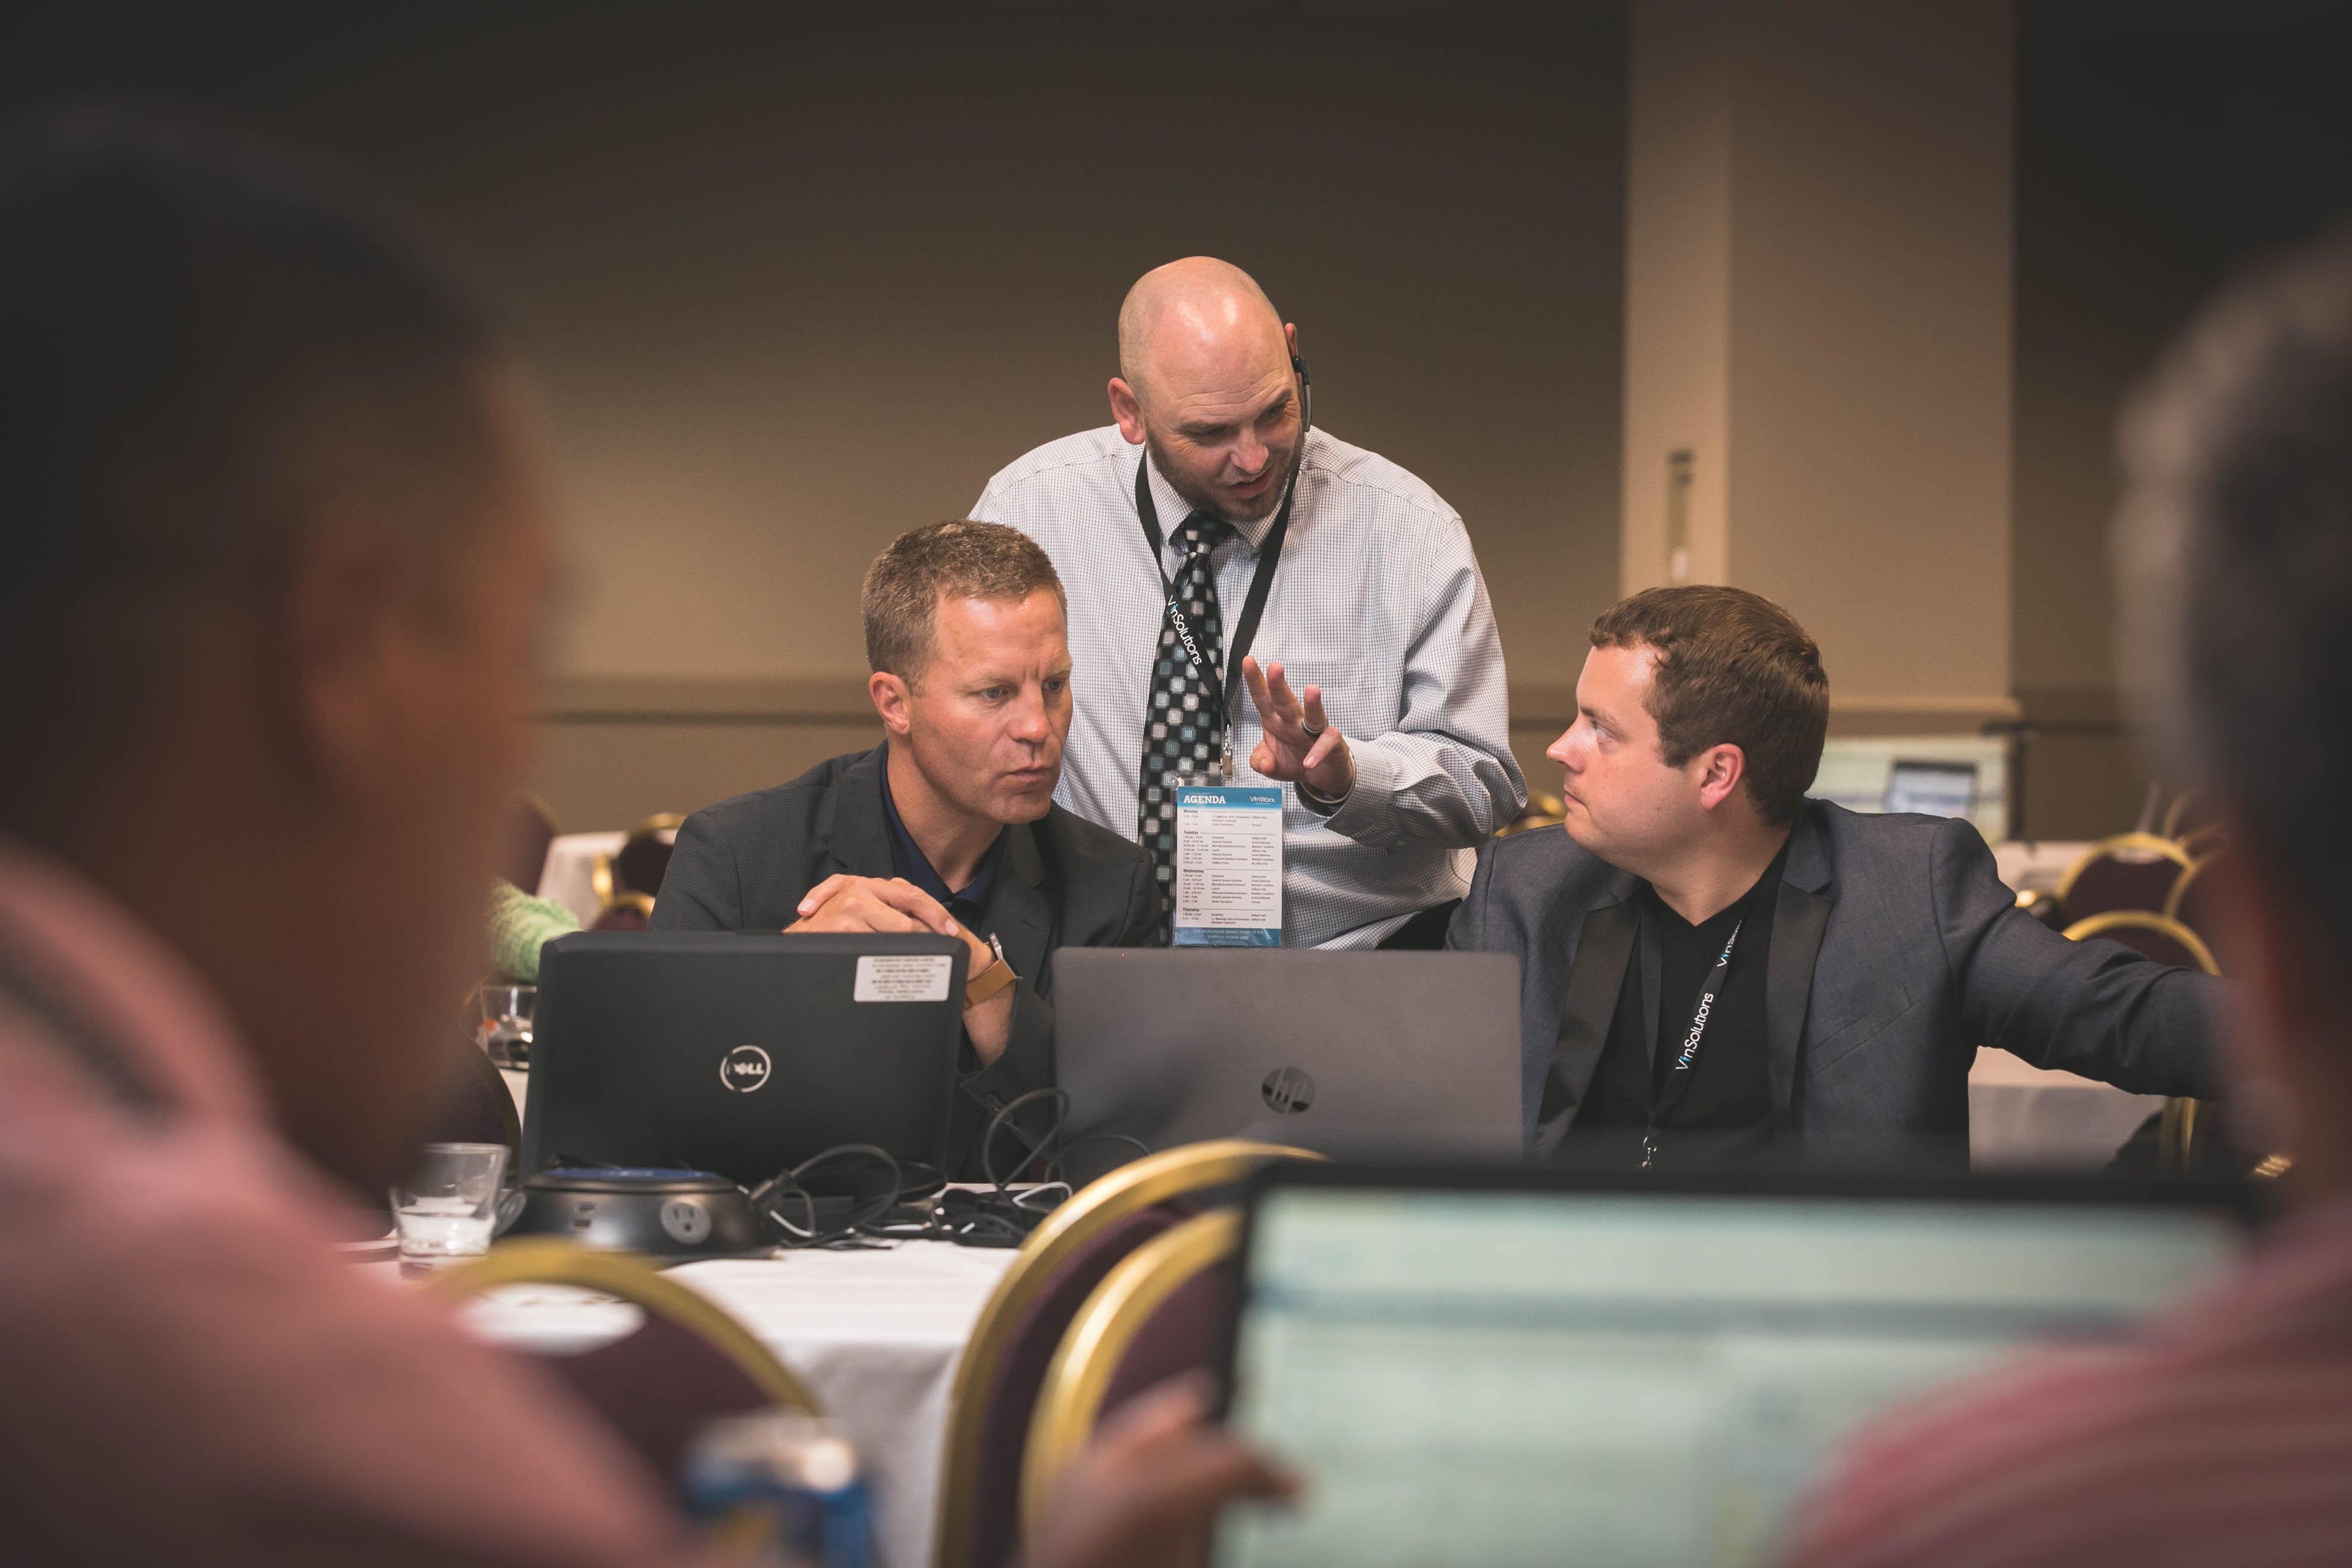 Dealers meet one-on-one with their Performance Manager to talk through ways to improve their Connect CRM utilization.